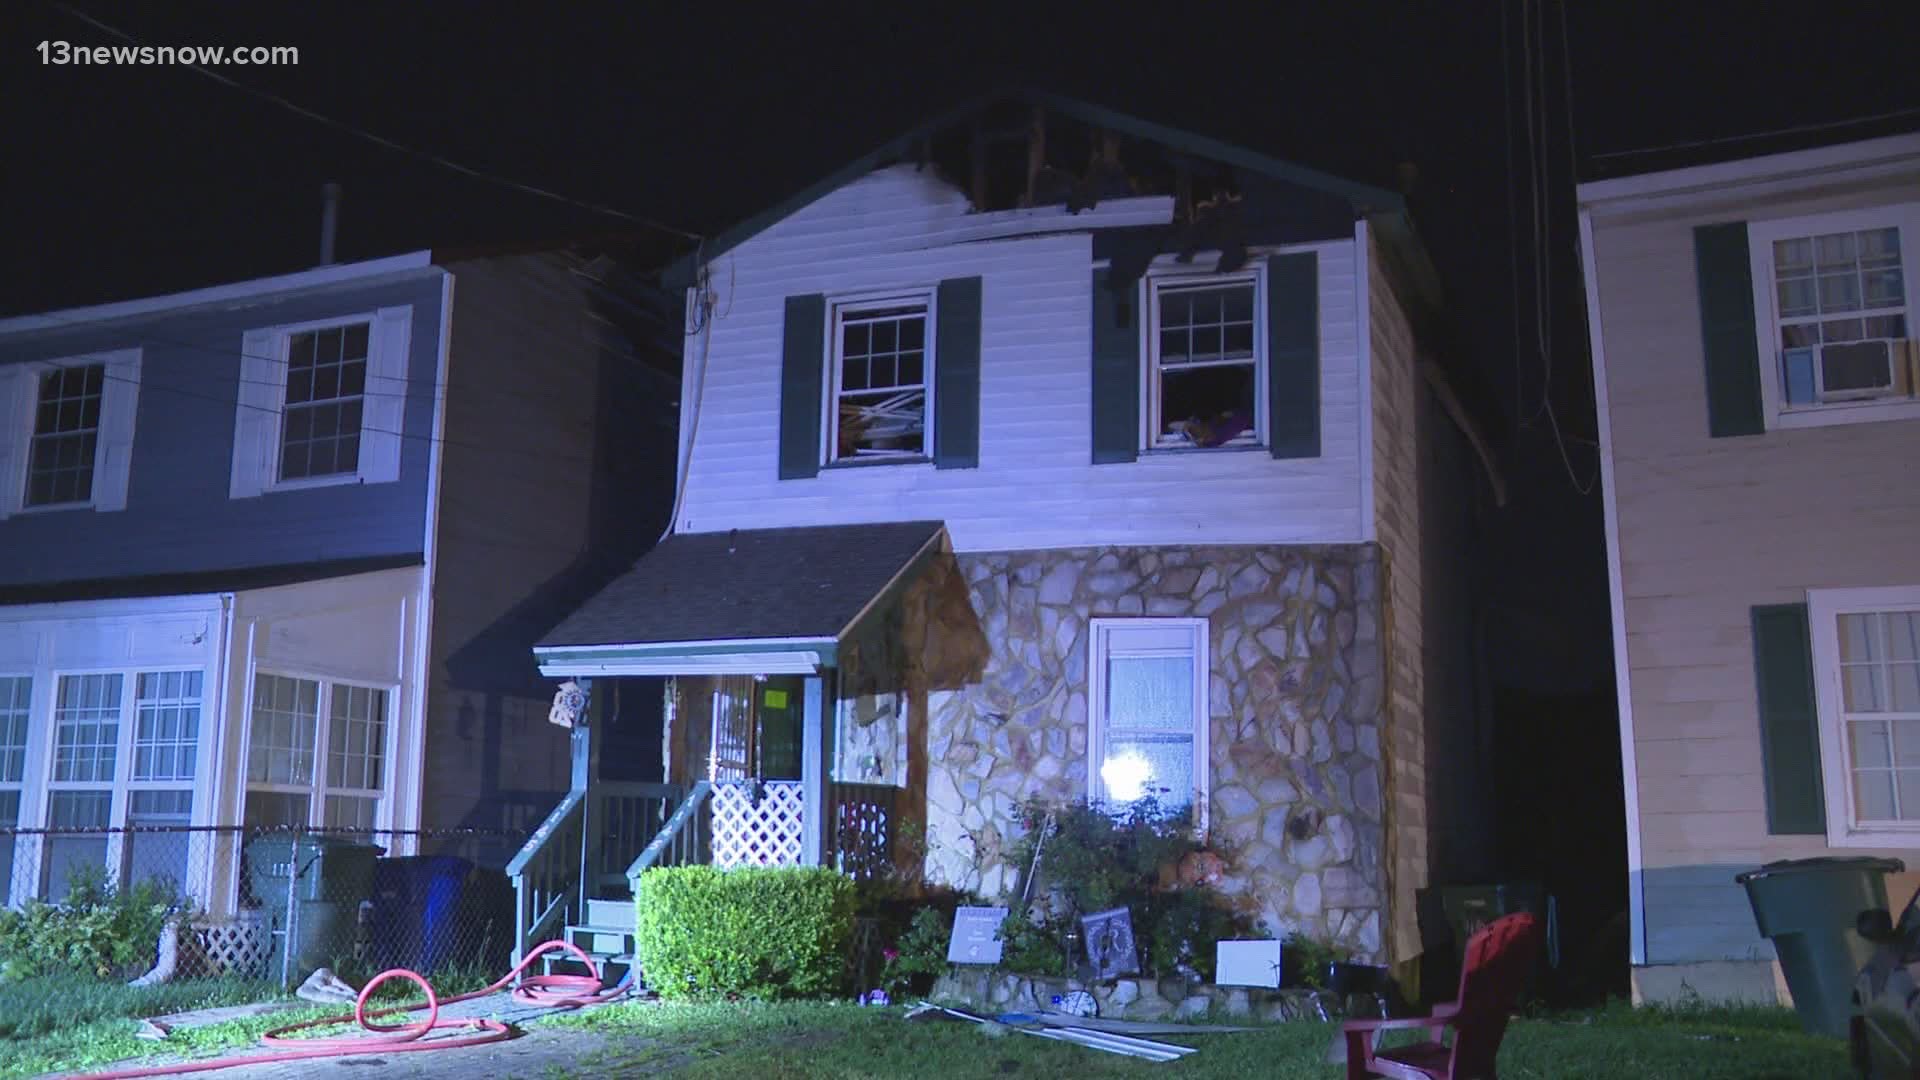 The Newport News Fire Department said three people were hospitalized with burns, and multiple residents were displaced, after an overnight house fire on 22nd Street.